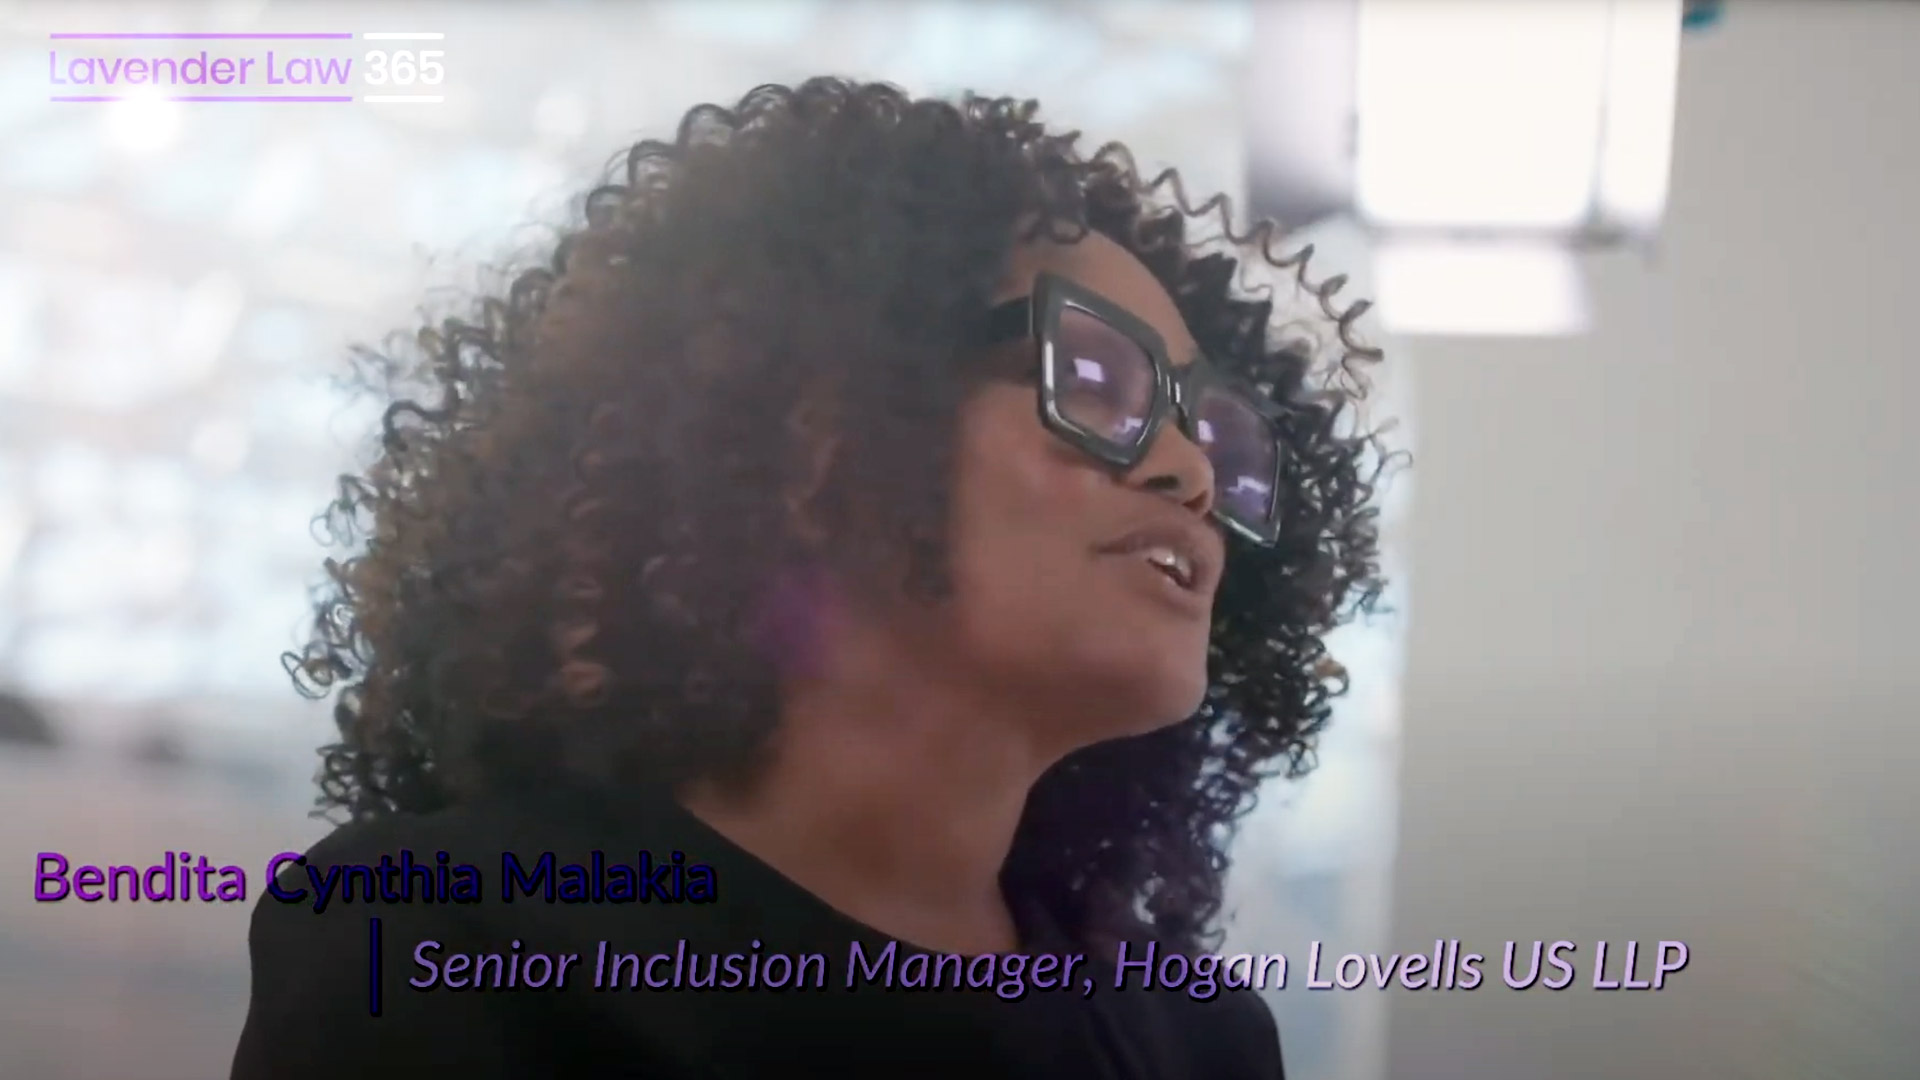 Bendita Cynthia Malakia, Senior Inclusion Manager, Hogan Lovells US LLP on Diversity, Equity and Inclusion and the Lavender Law 365® Program